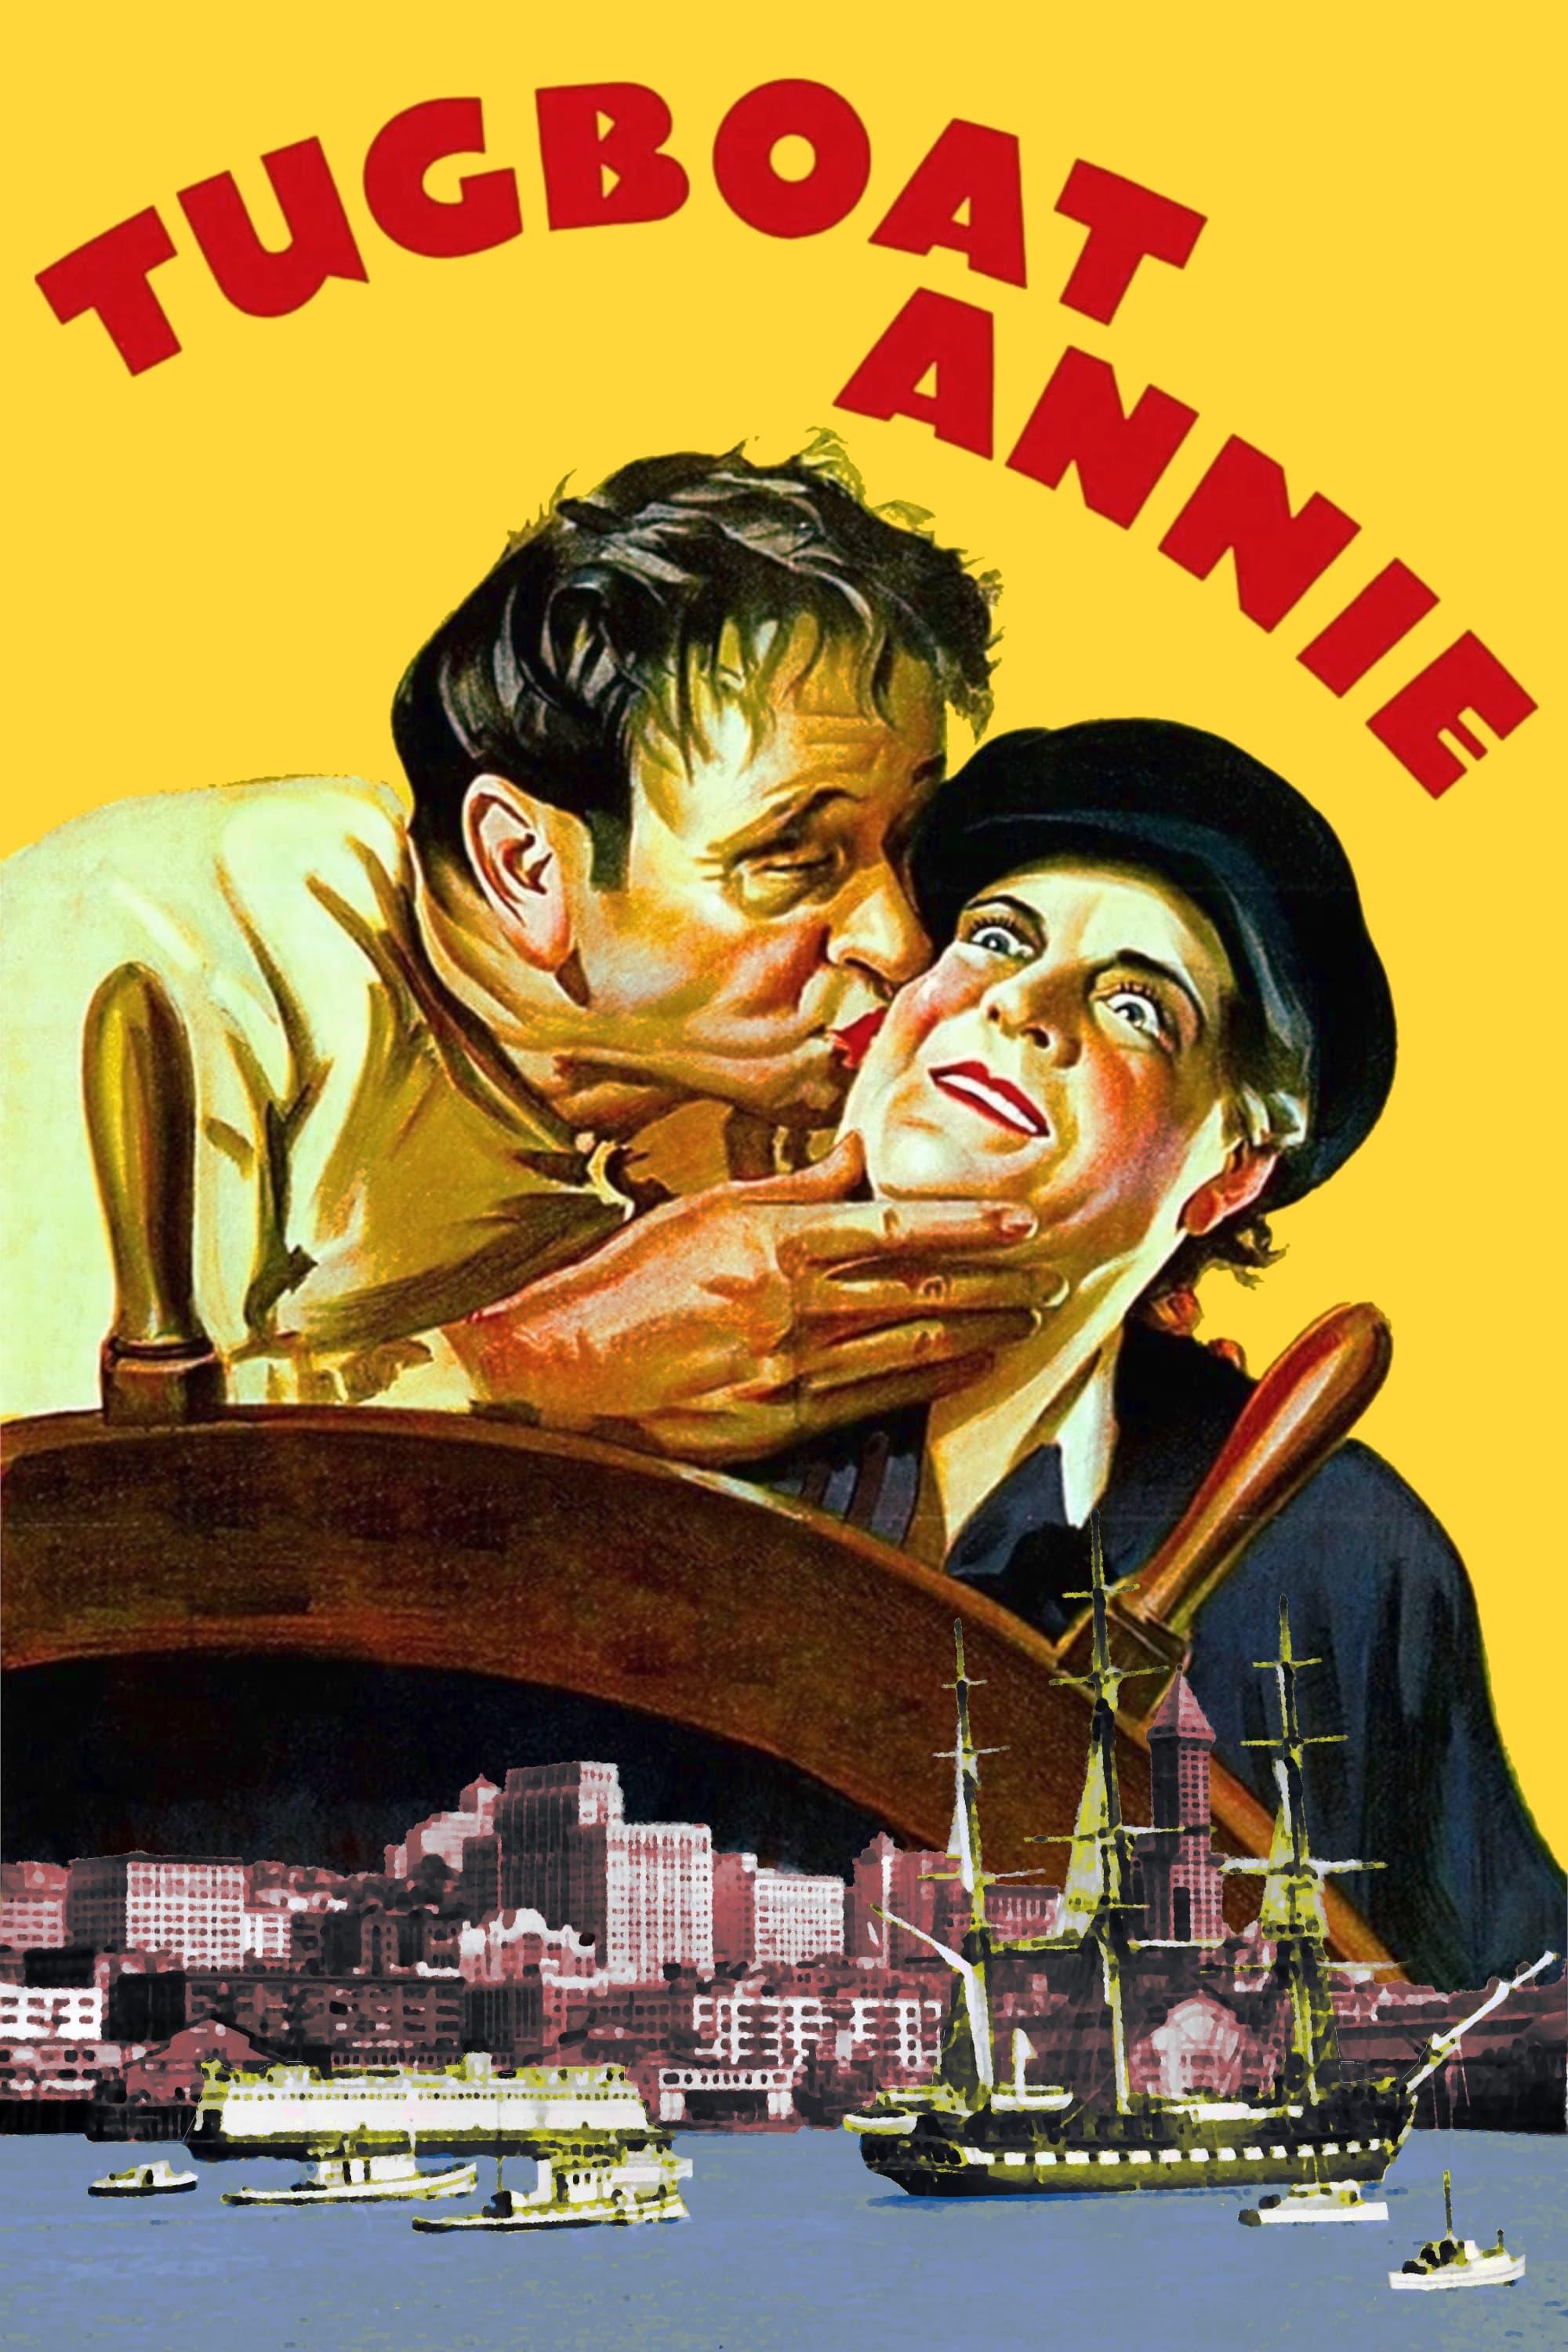 Tugboat Annie poster